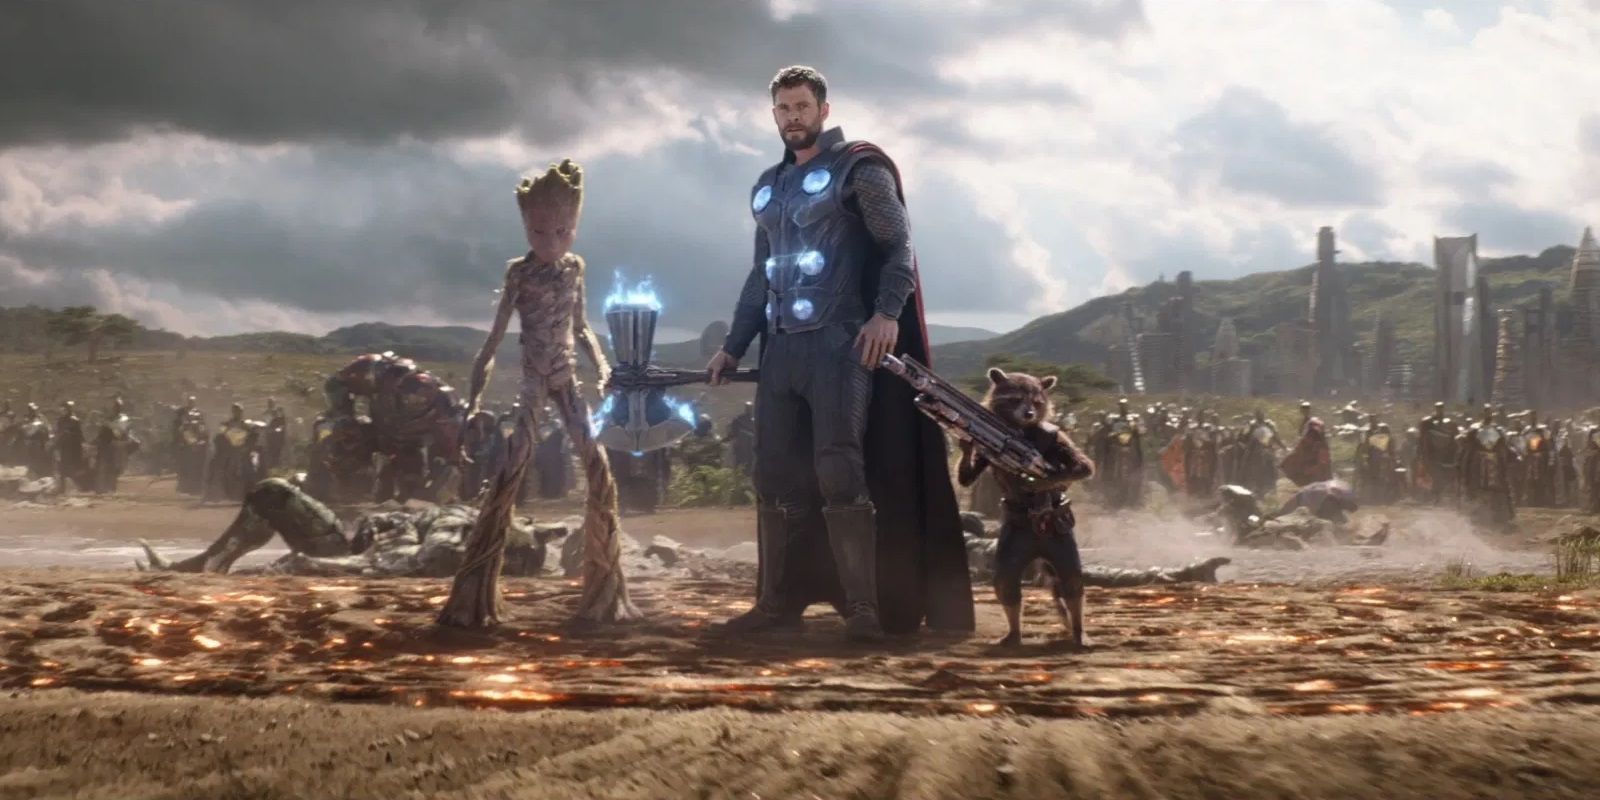 Groot, Thor, and Rocket at the battle of Wakanda in Avengers: Infinity War.